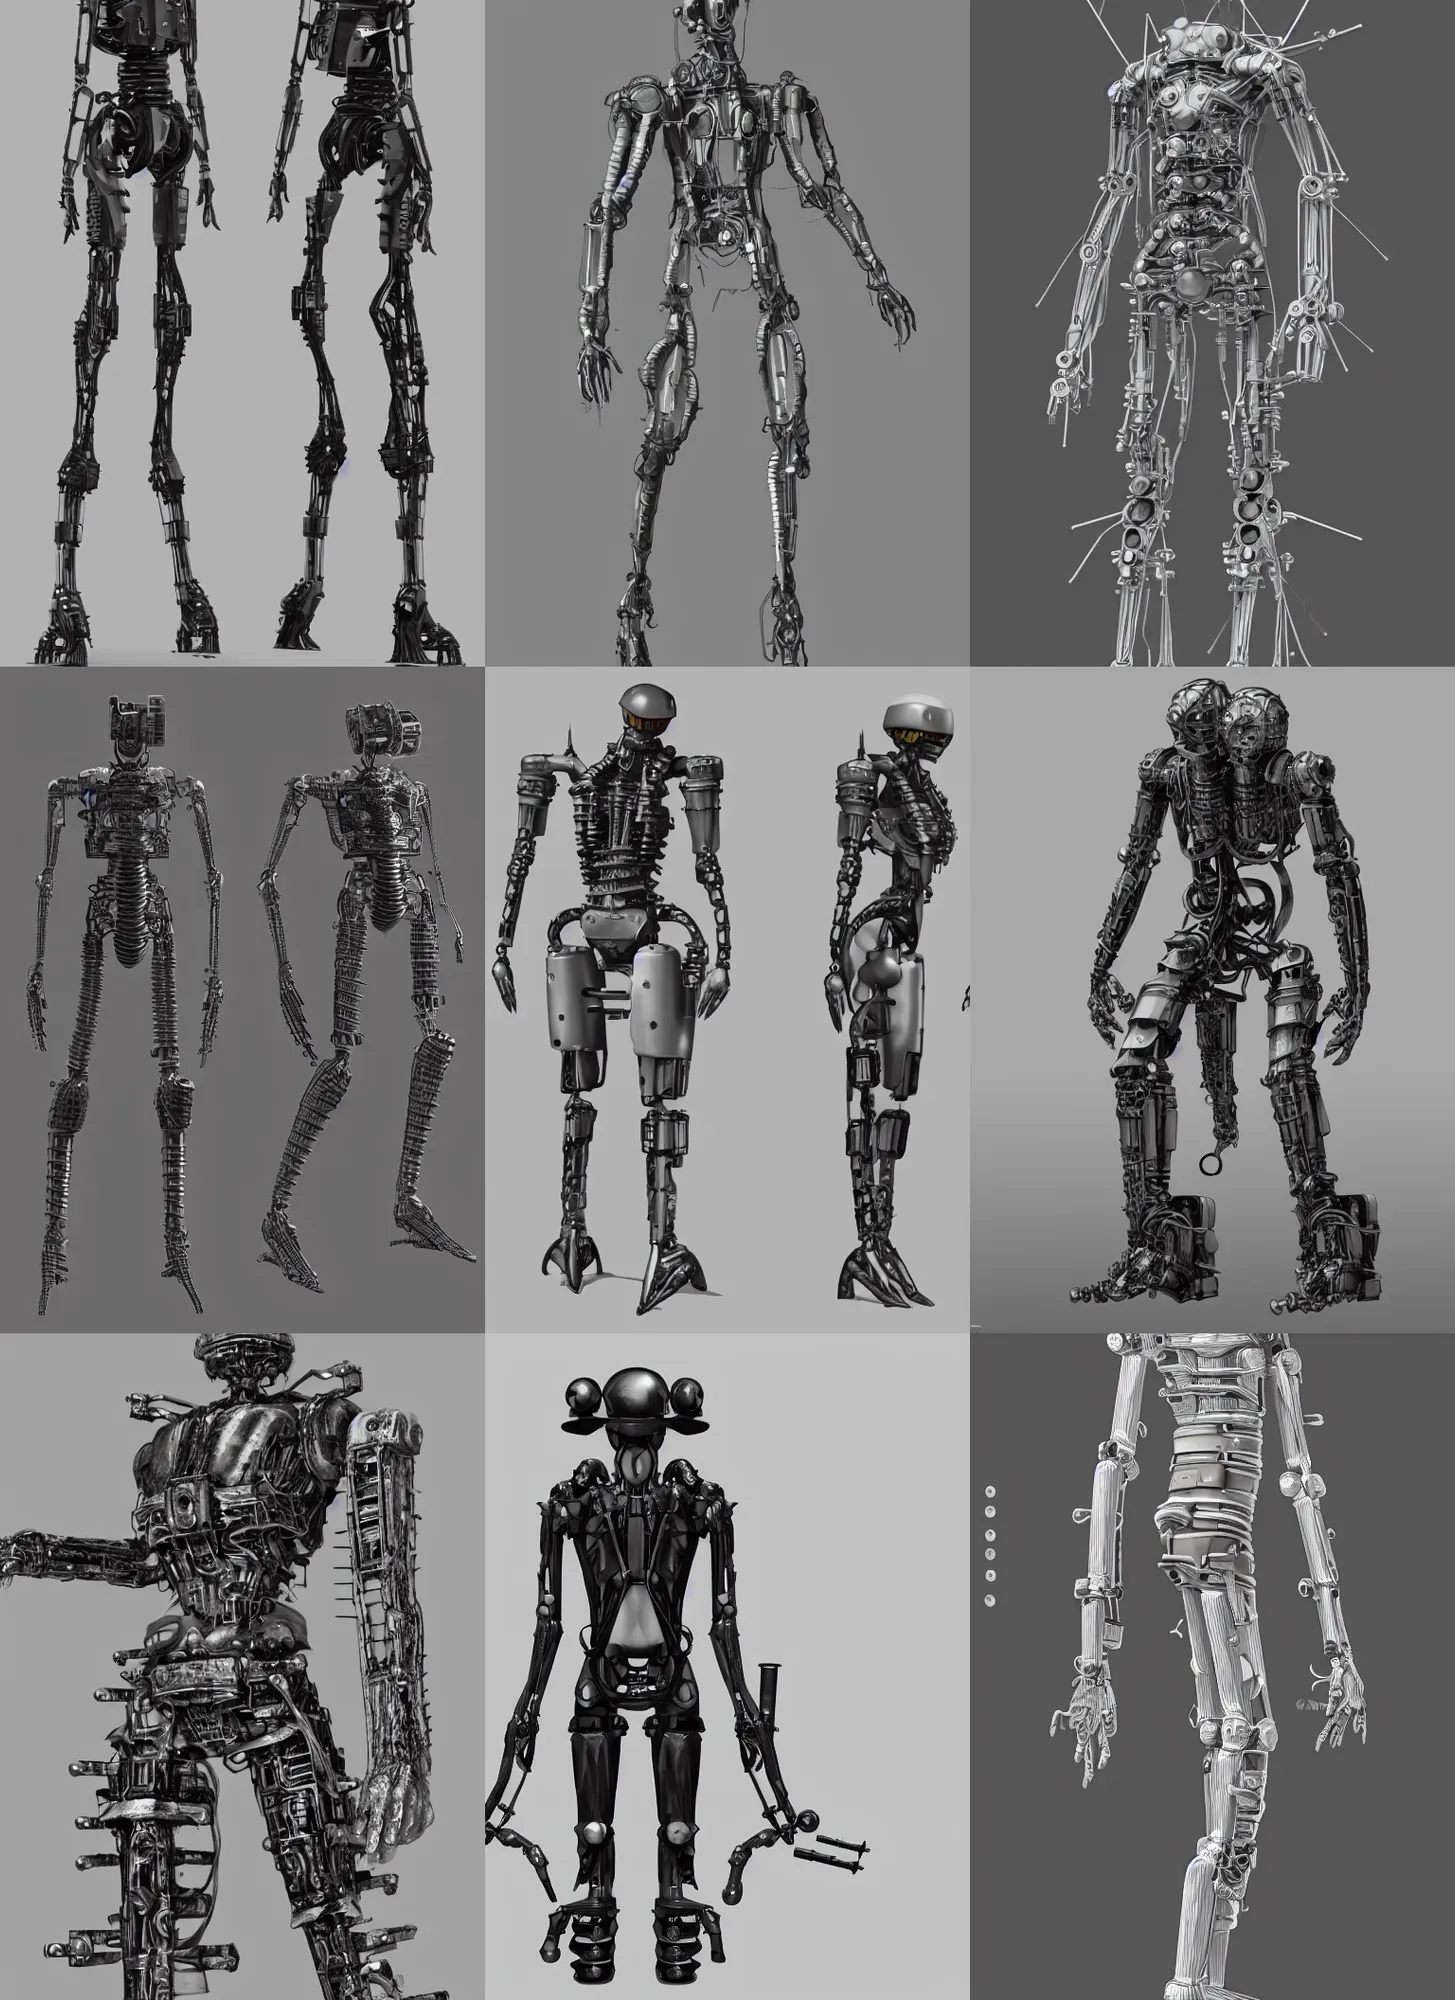 Prompt: CAD design of a photorealistic hardened posthuman android body modeled after industrial hydraulic machinery with prominent ceramic hex tile armor plates and multiple appendages, solidworks, catia, autodesk inventor, unreal engine, silicon life exoskeleton cad design inspired by Masamune Shirow and Tsutomu Nihei from BLAME!, product showcase, octane render 8k